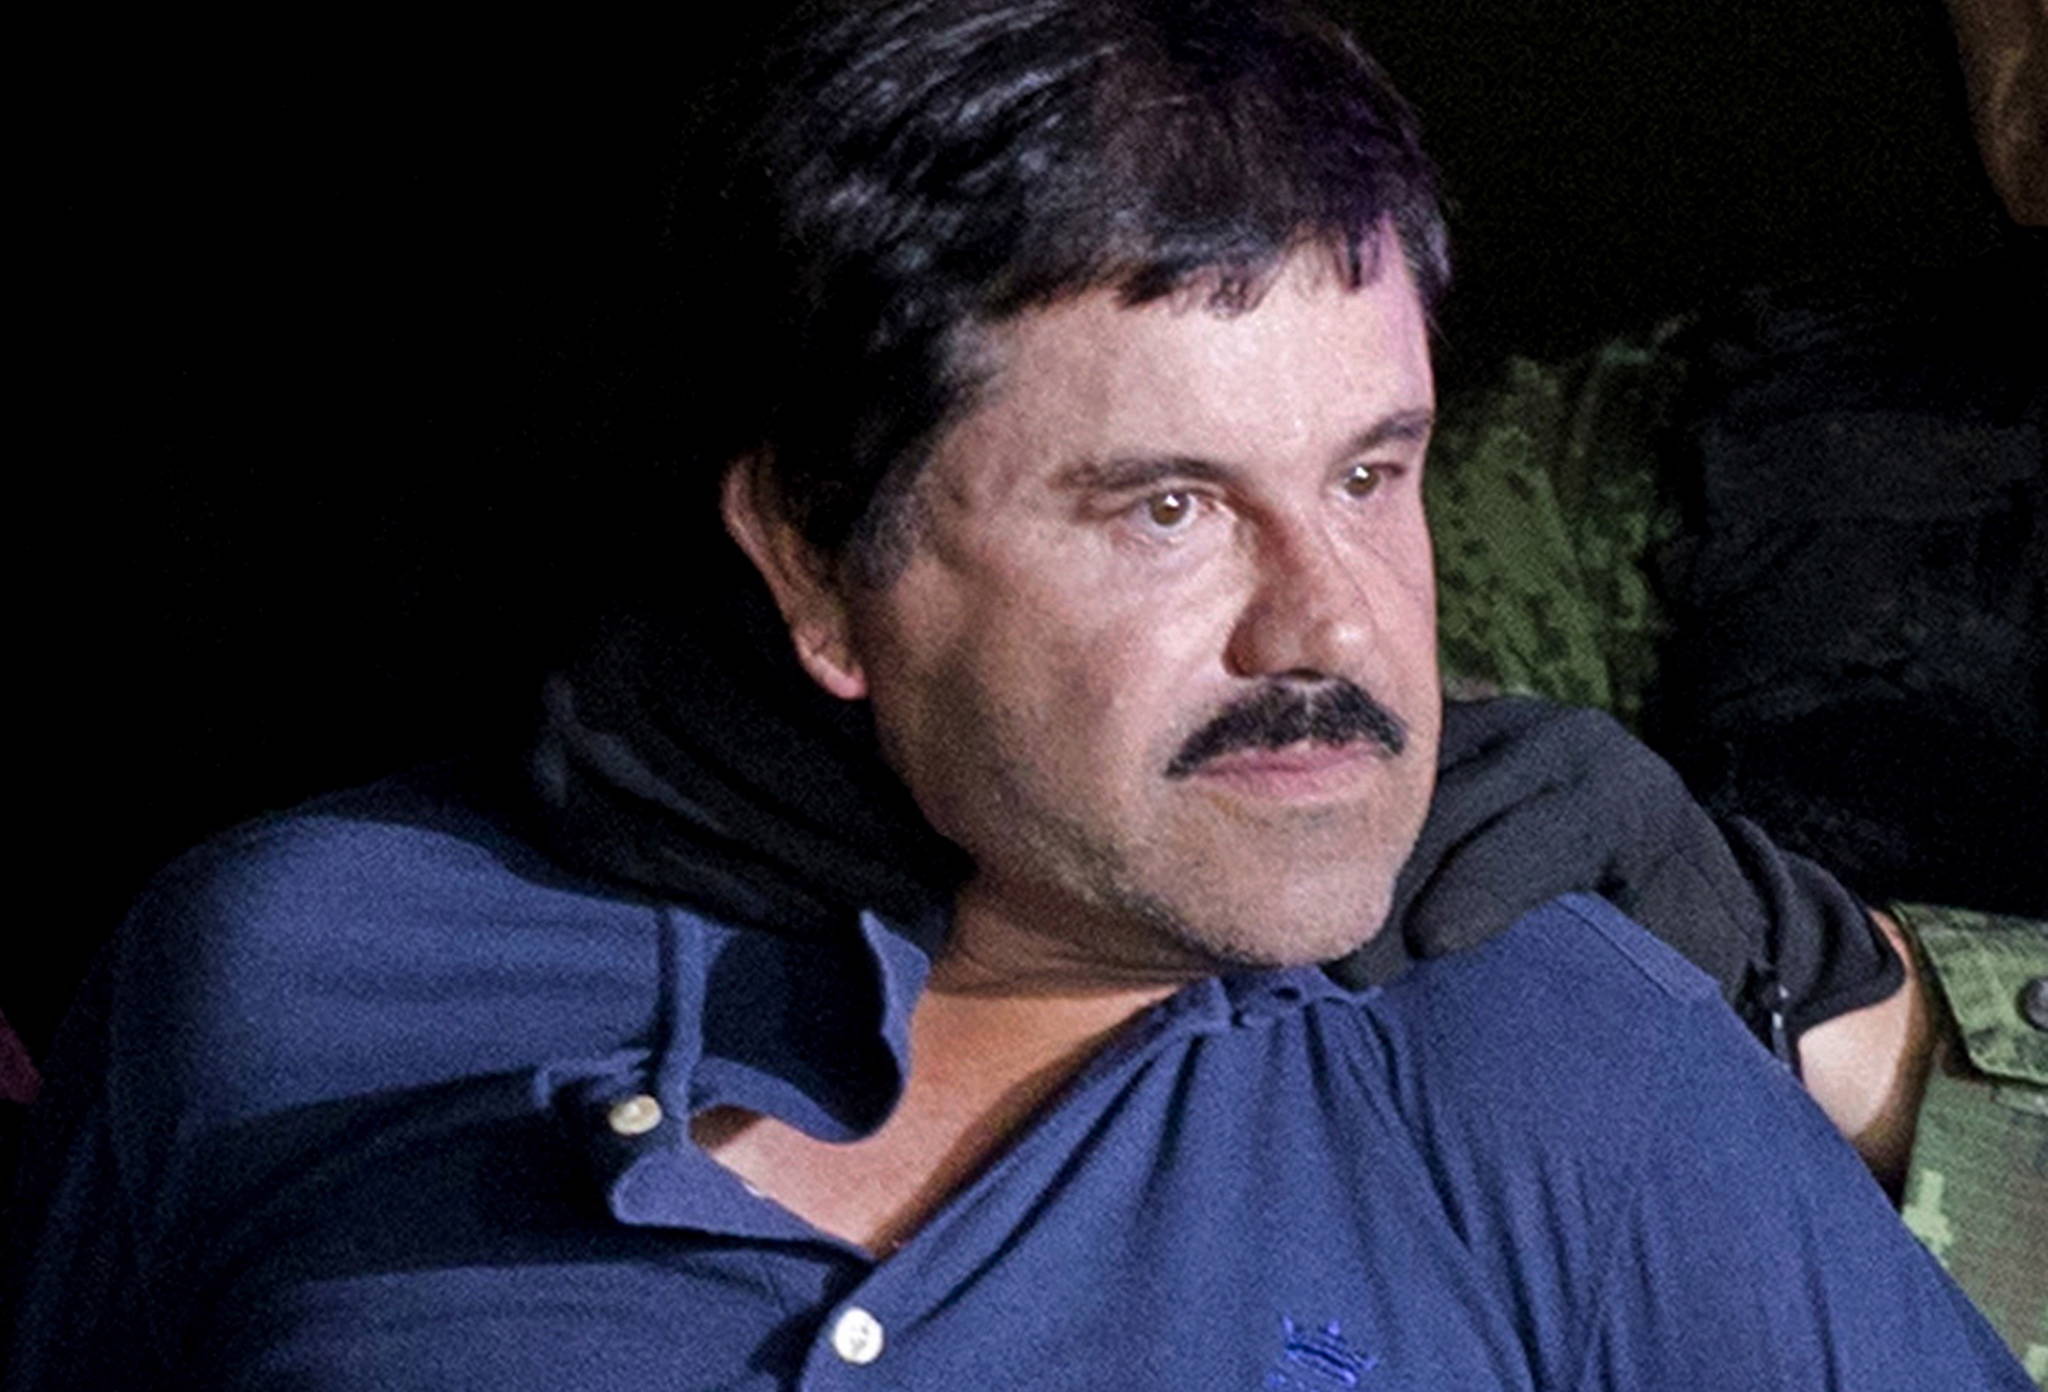 Jury set for deliberations at US trial of El Chapo